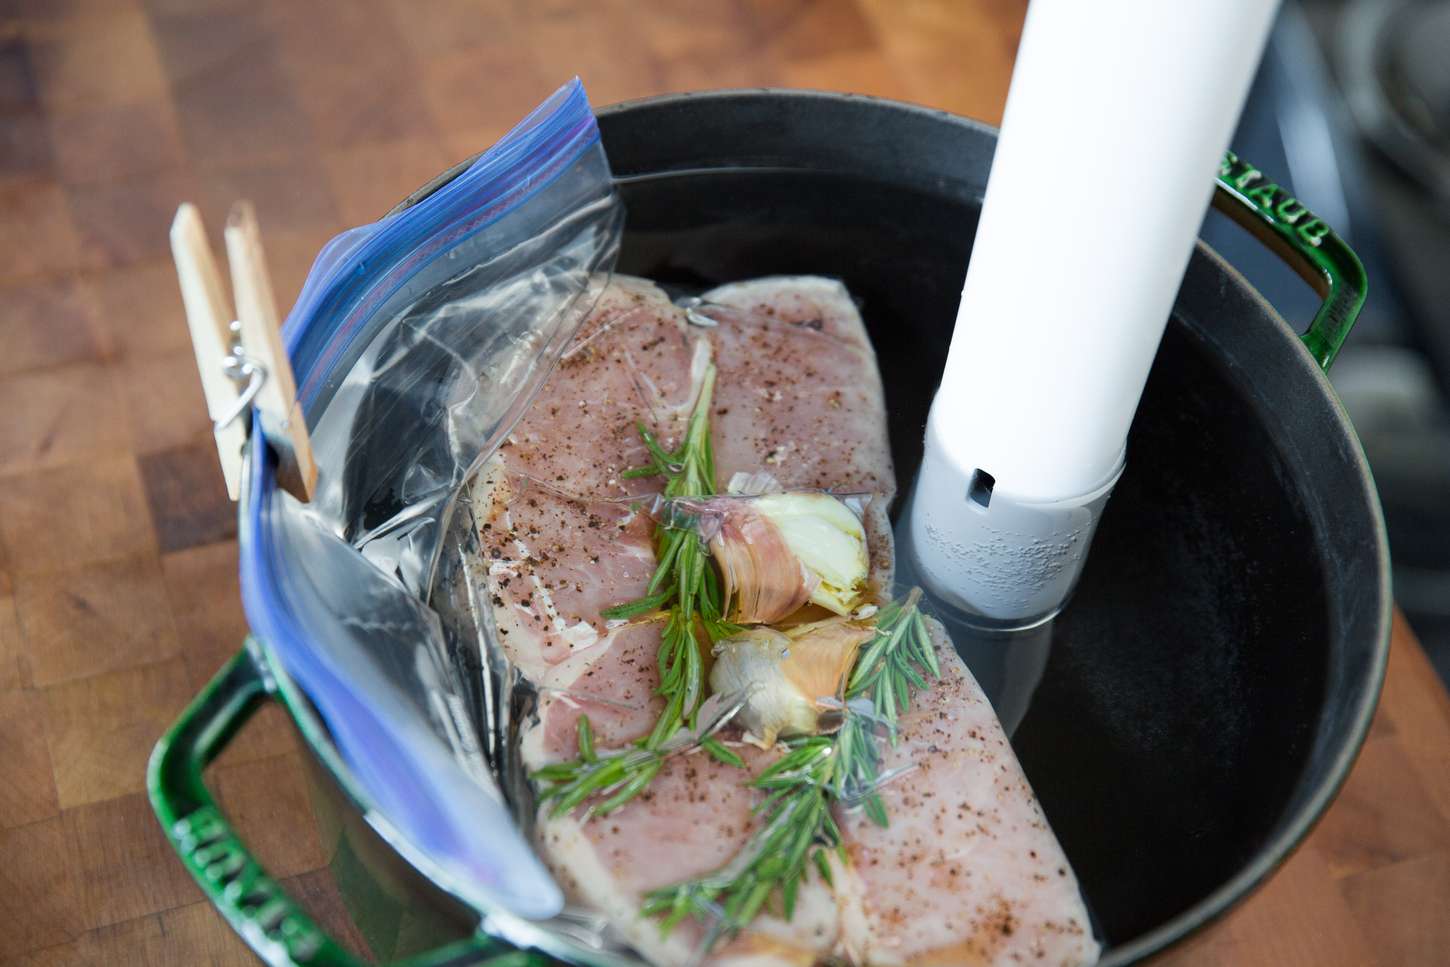 You Can Cook Frozen Food Sous Vide Without Defrosting! Here's How.